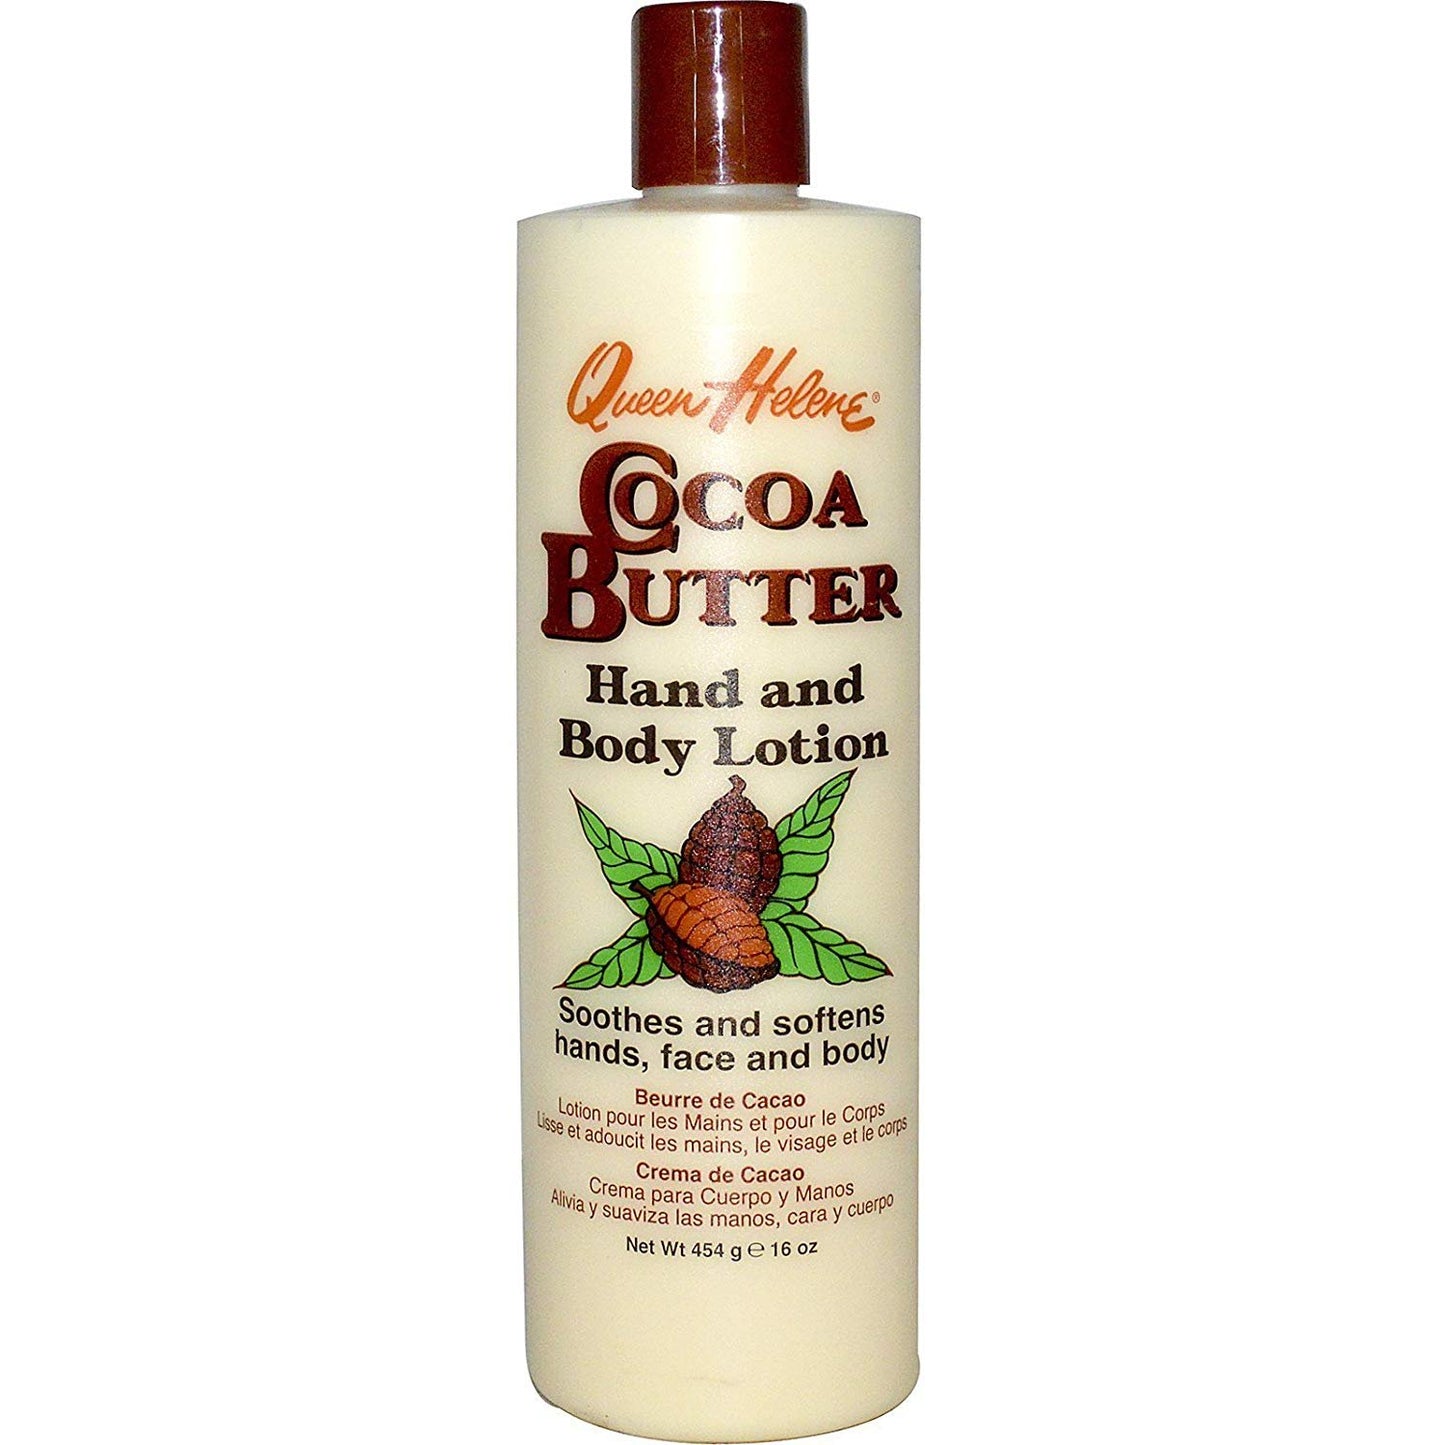 Queen Helene Cocoa Butter Hand & Body Lotion 16oz